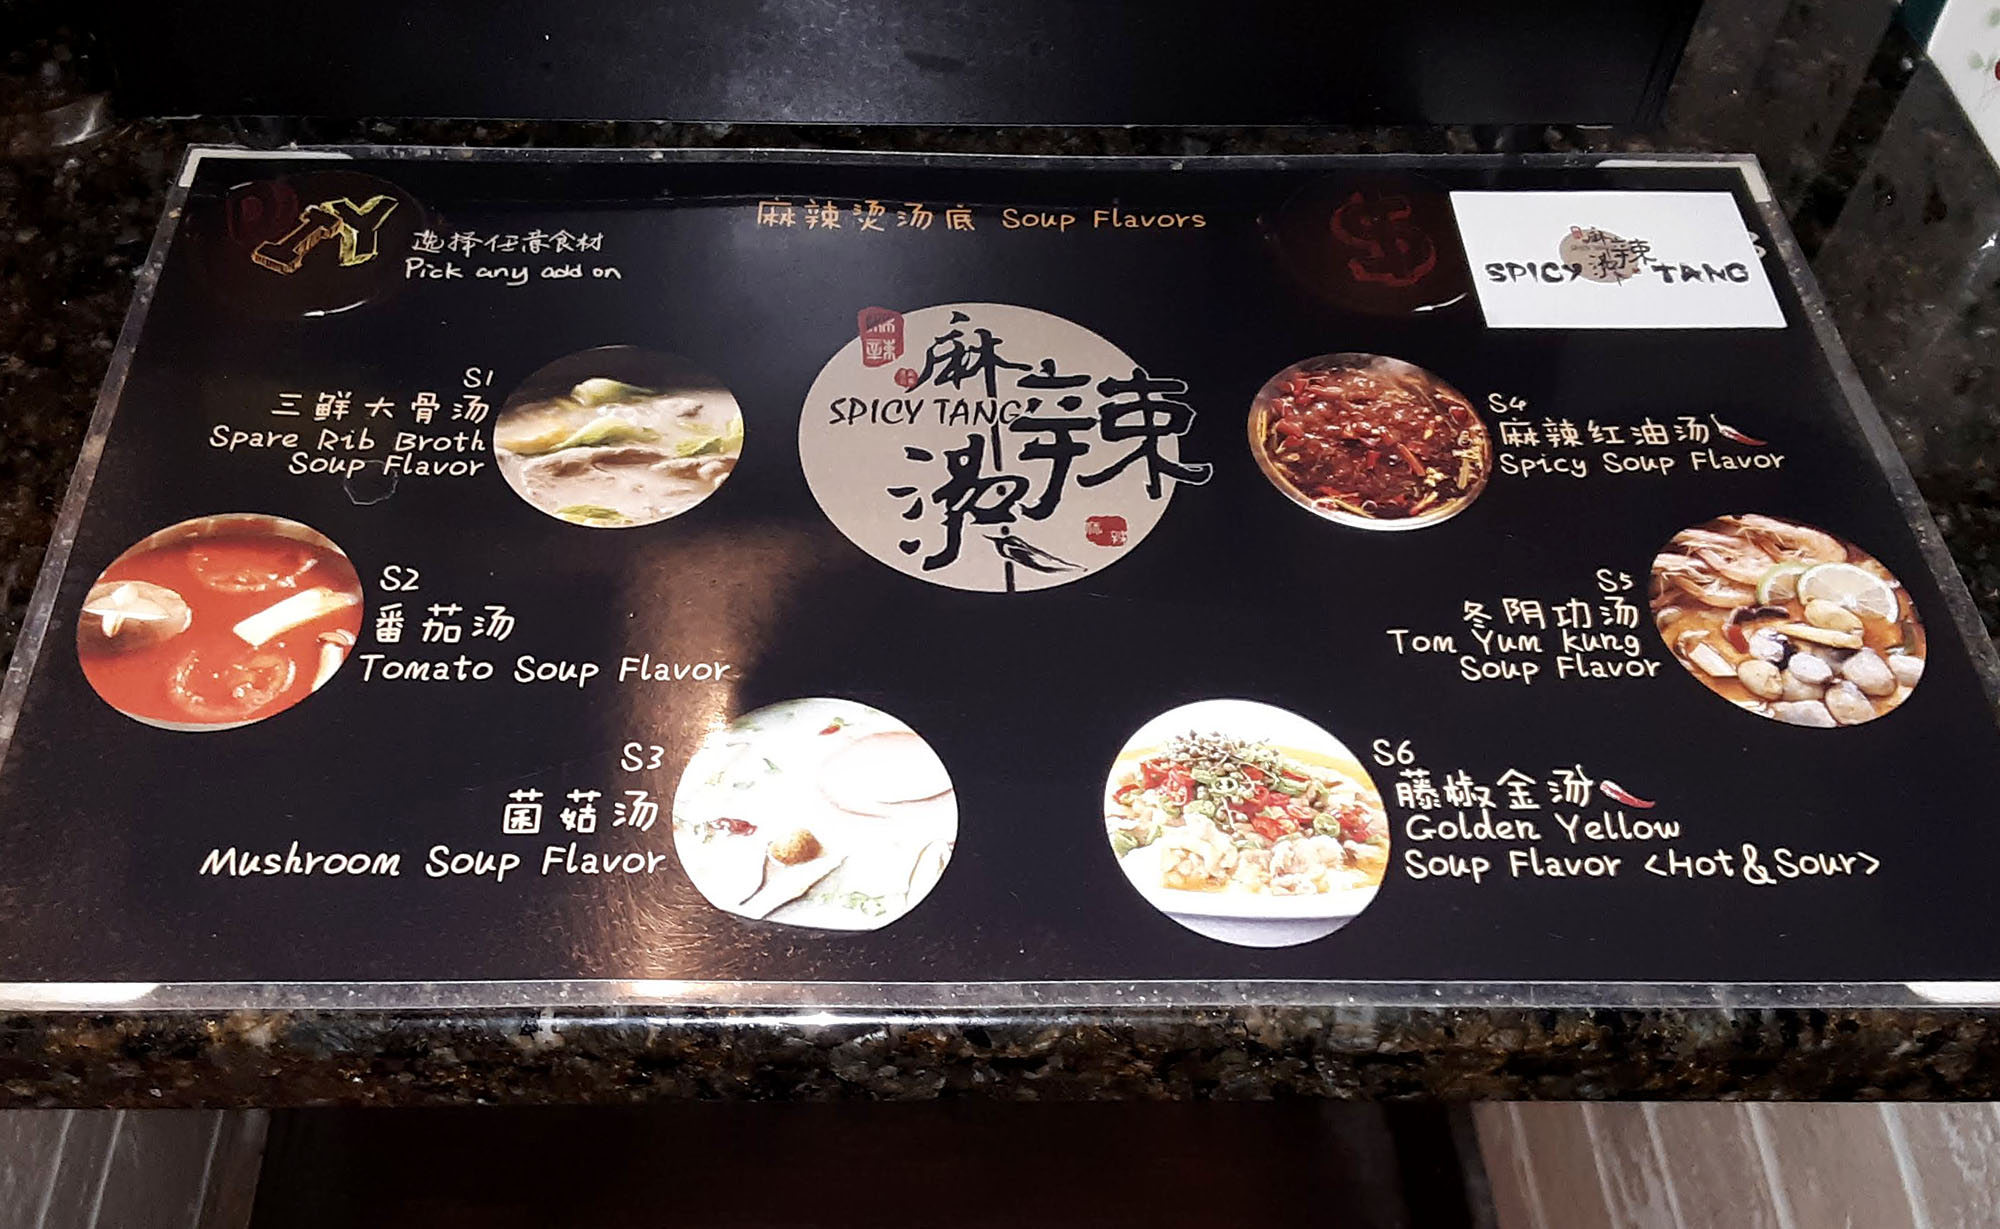 A laminated chart shows six broth choices at Spicy Tang. Photo by Paul Young.